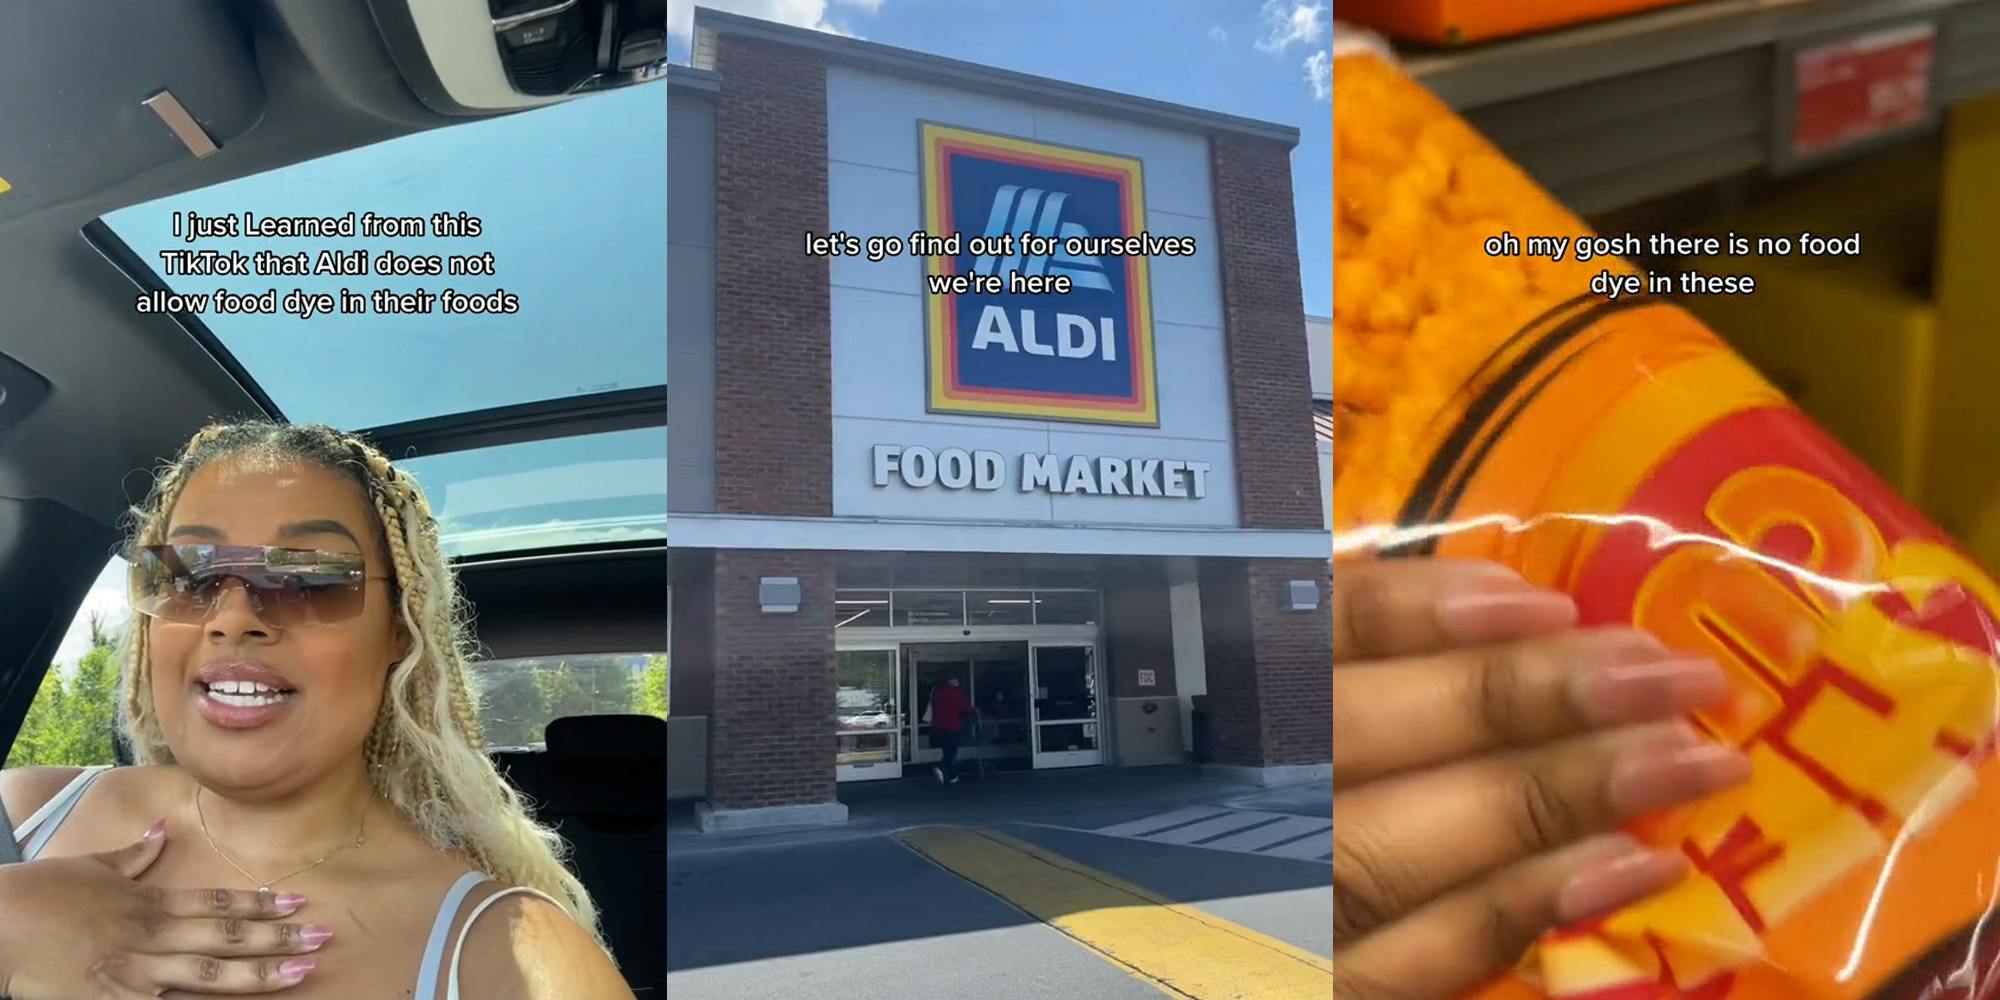 person speaking in car with hand on chest with caption "I just learned from this TikTok that Aldi does not allow food dye in their foods" (l) Aldi building with sign with caption "let's go find out for ourselves we're here" (c) hand holding Aldi's brand cheetos with caption "oh my gosh there is no food dye in these" (r)